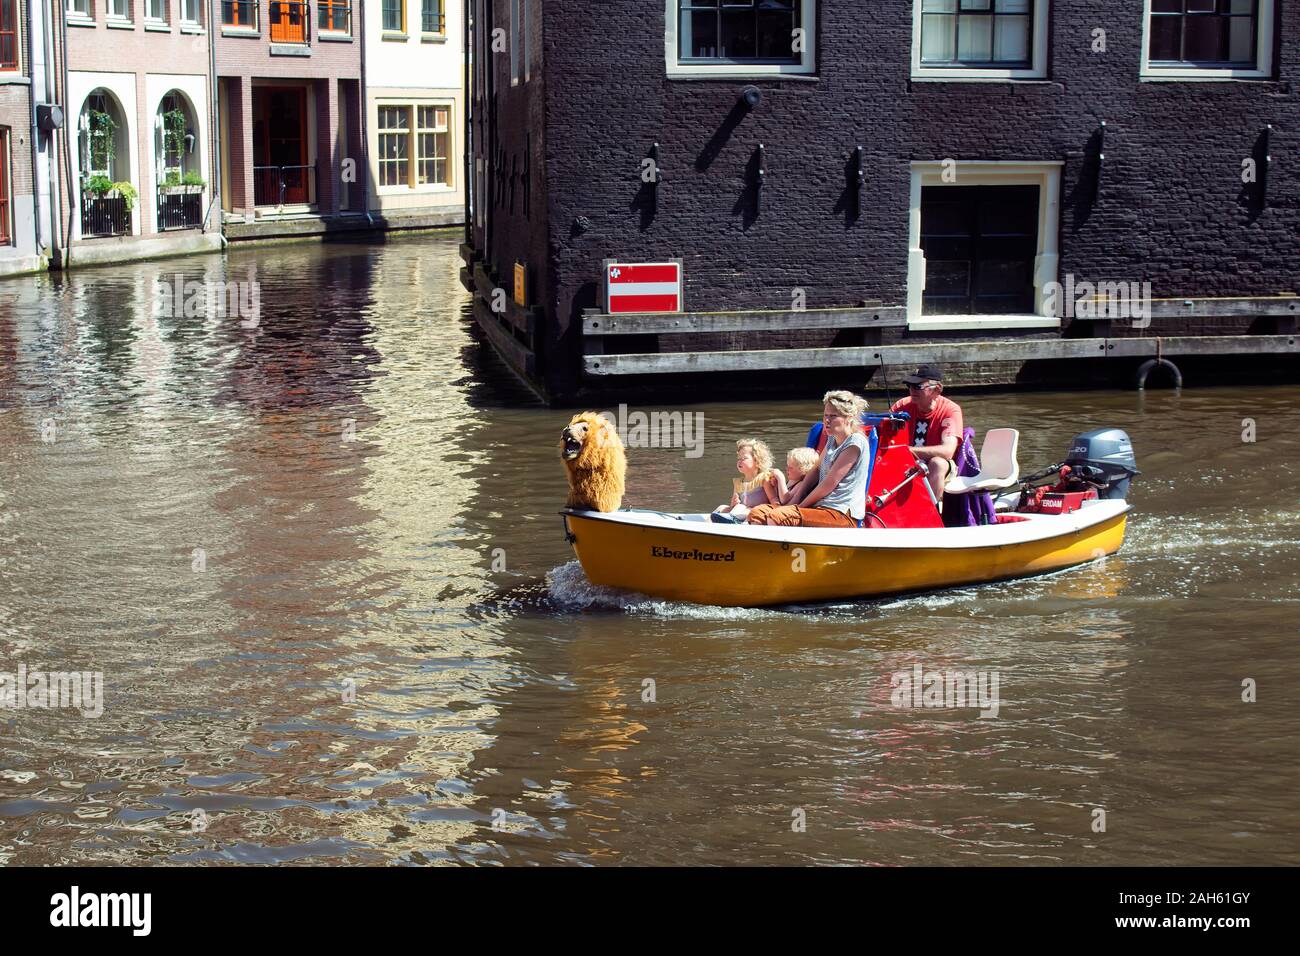 Close up view of a family riding a small, yellow, open boat in canal doing a tour at Armbrug bridge area in Amsterdam. It is a sunny summer day. Stock Photo